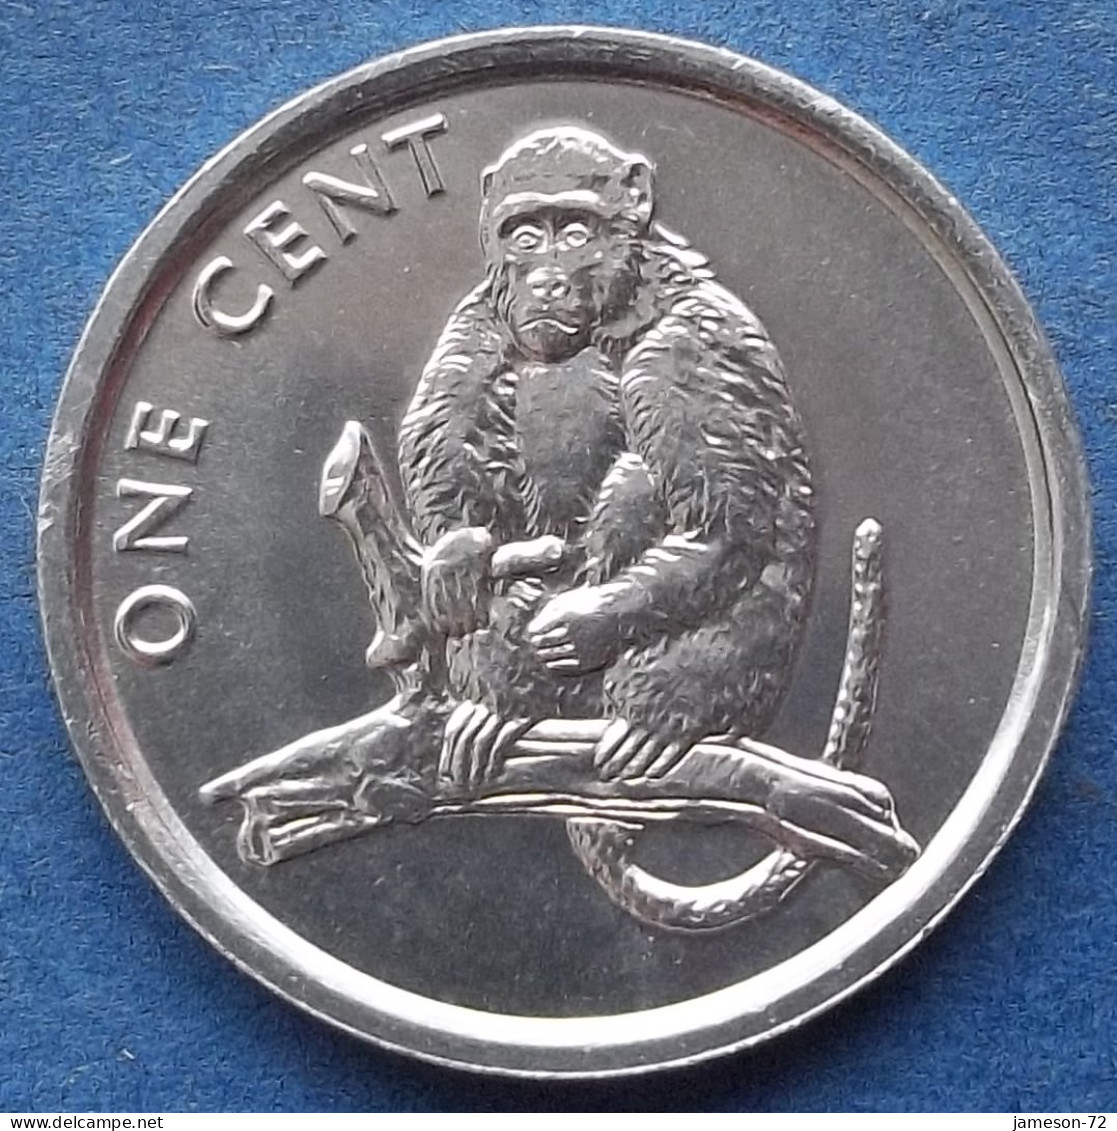 COOK ISLANDS - 1 Cent 2003 "Monkey On Branch" KM# 423 Dependency Of New Zealand Elizabeth II - Edelweiss Coins - Cookinseln